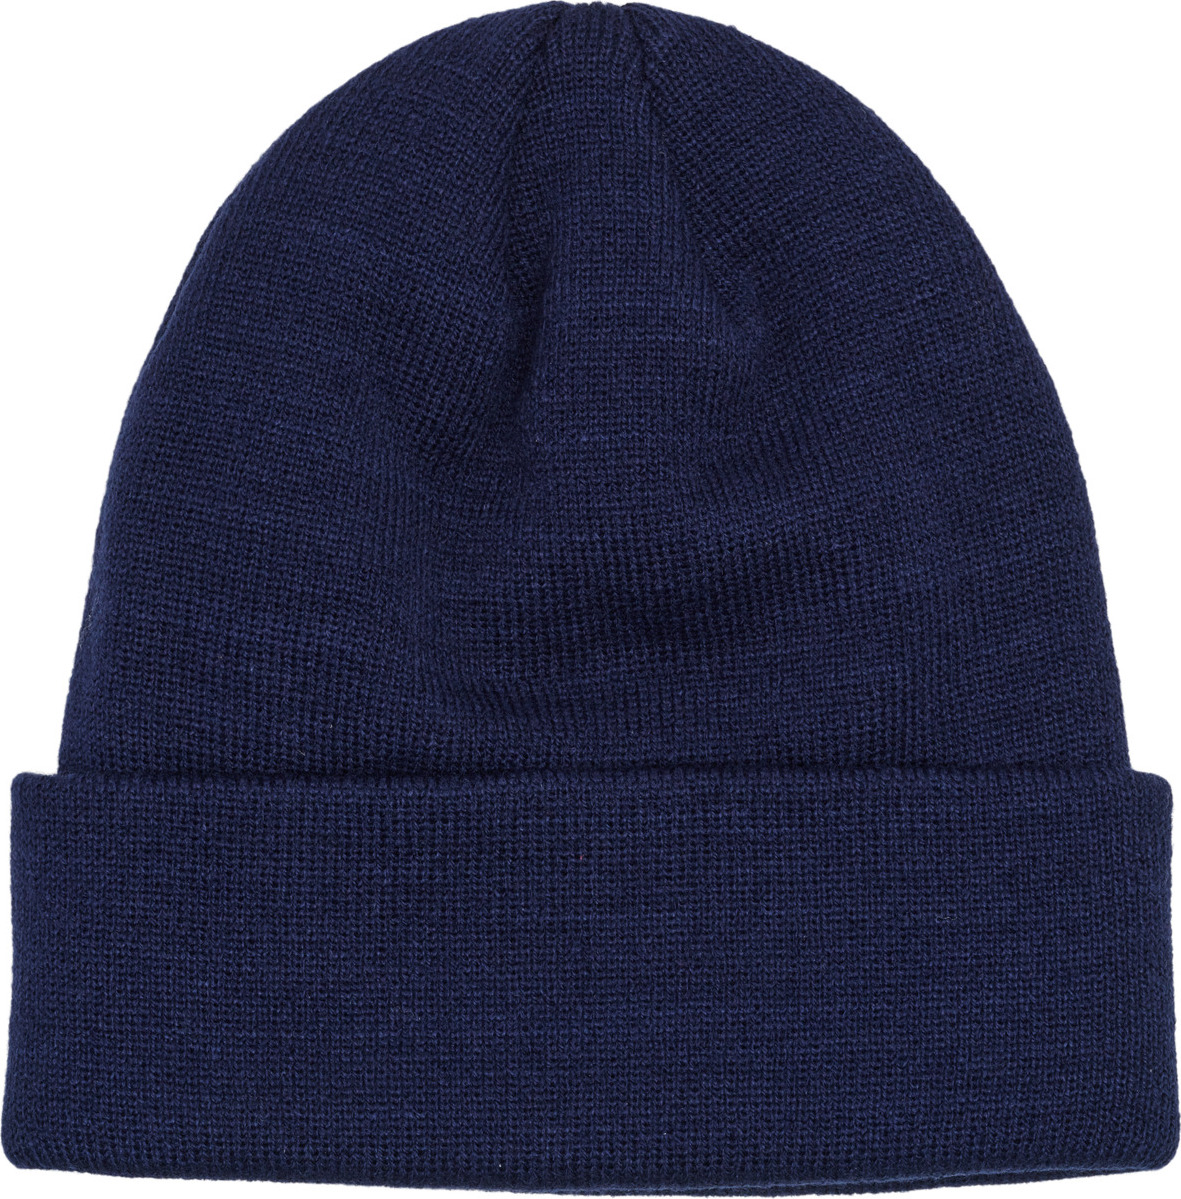 | hmlLEGACY Buy hmlLEGACY Beanie Core Outnorth Beanie here Peacoat Peacoat | Core